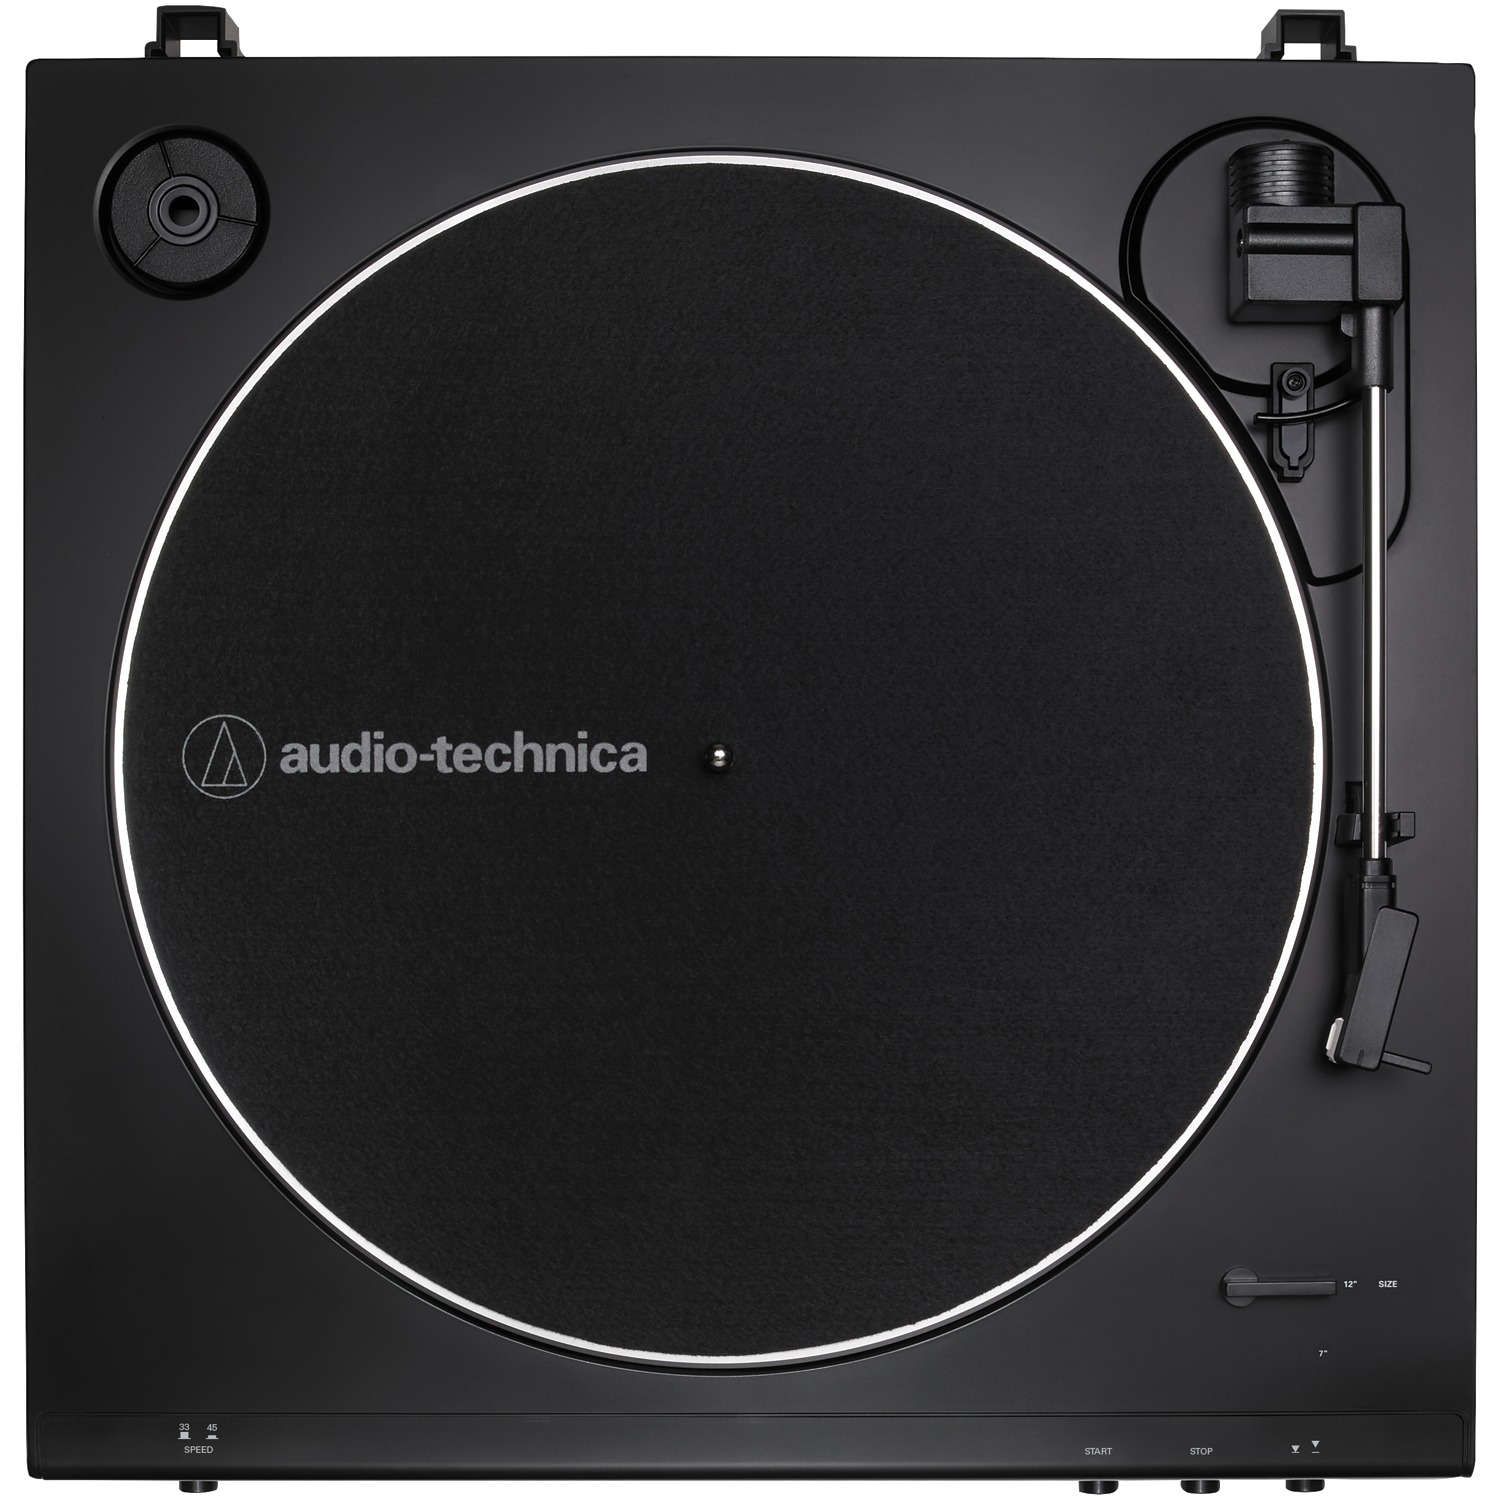 Audio-Technica AT-LP60X Fully Automatic Belt-Drive Stereo Turntable (Black) - image 4 of 4